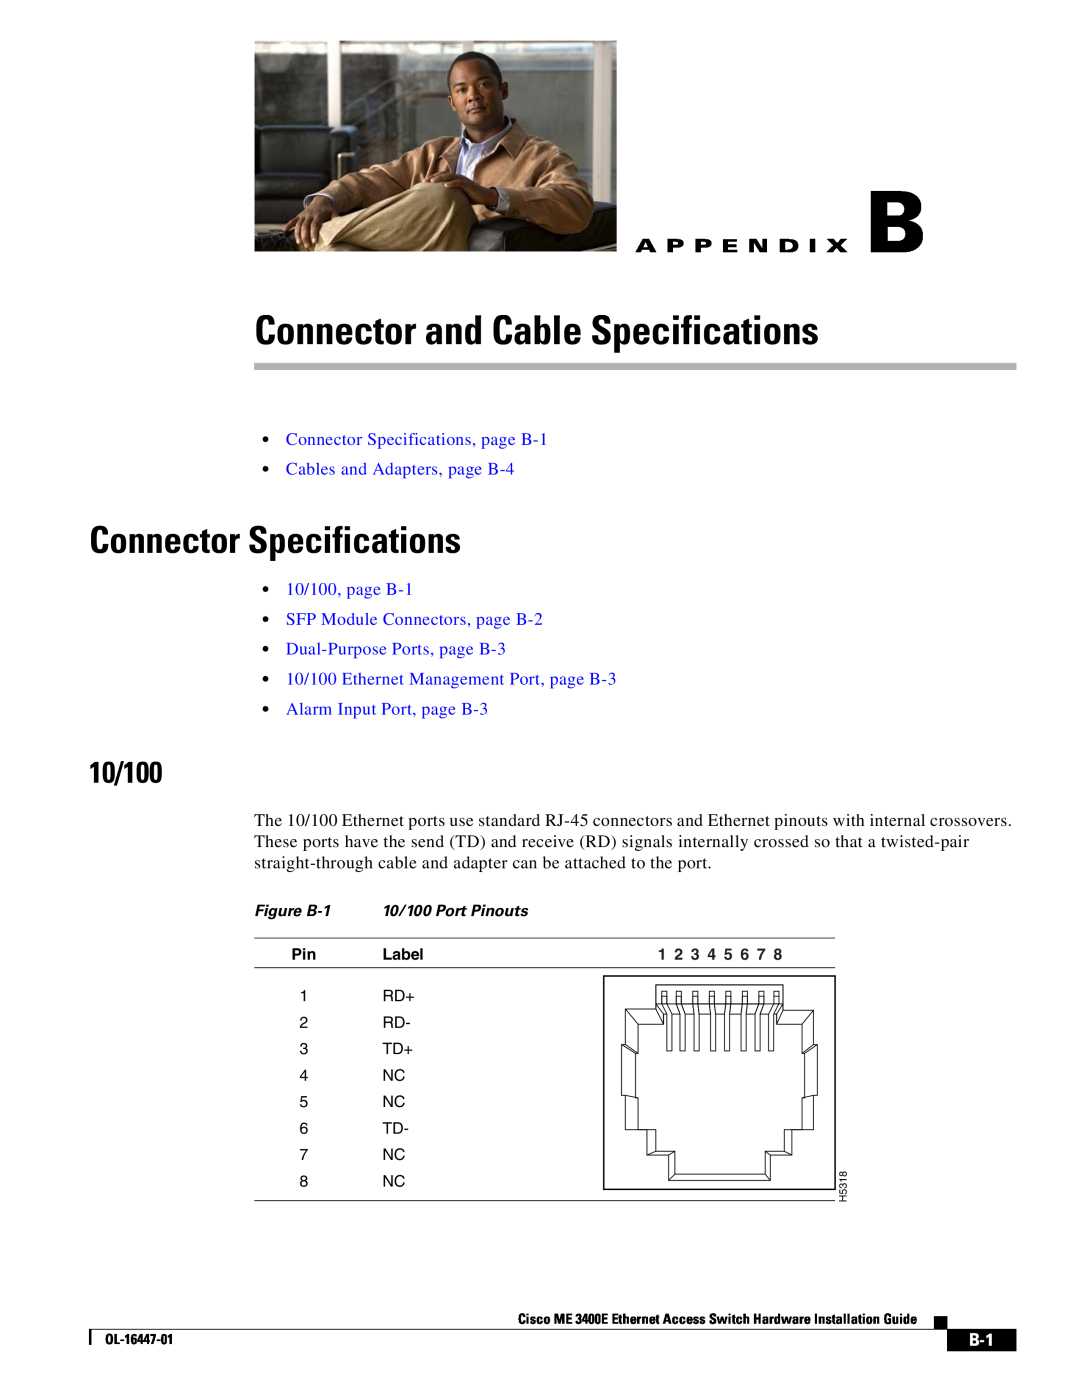 Cisco Systems OL-16447-01 manual Connector and Cable Specifications, Connector Specifications, 10/100, A P P E N D I X B 